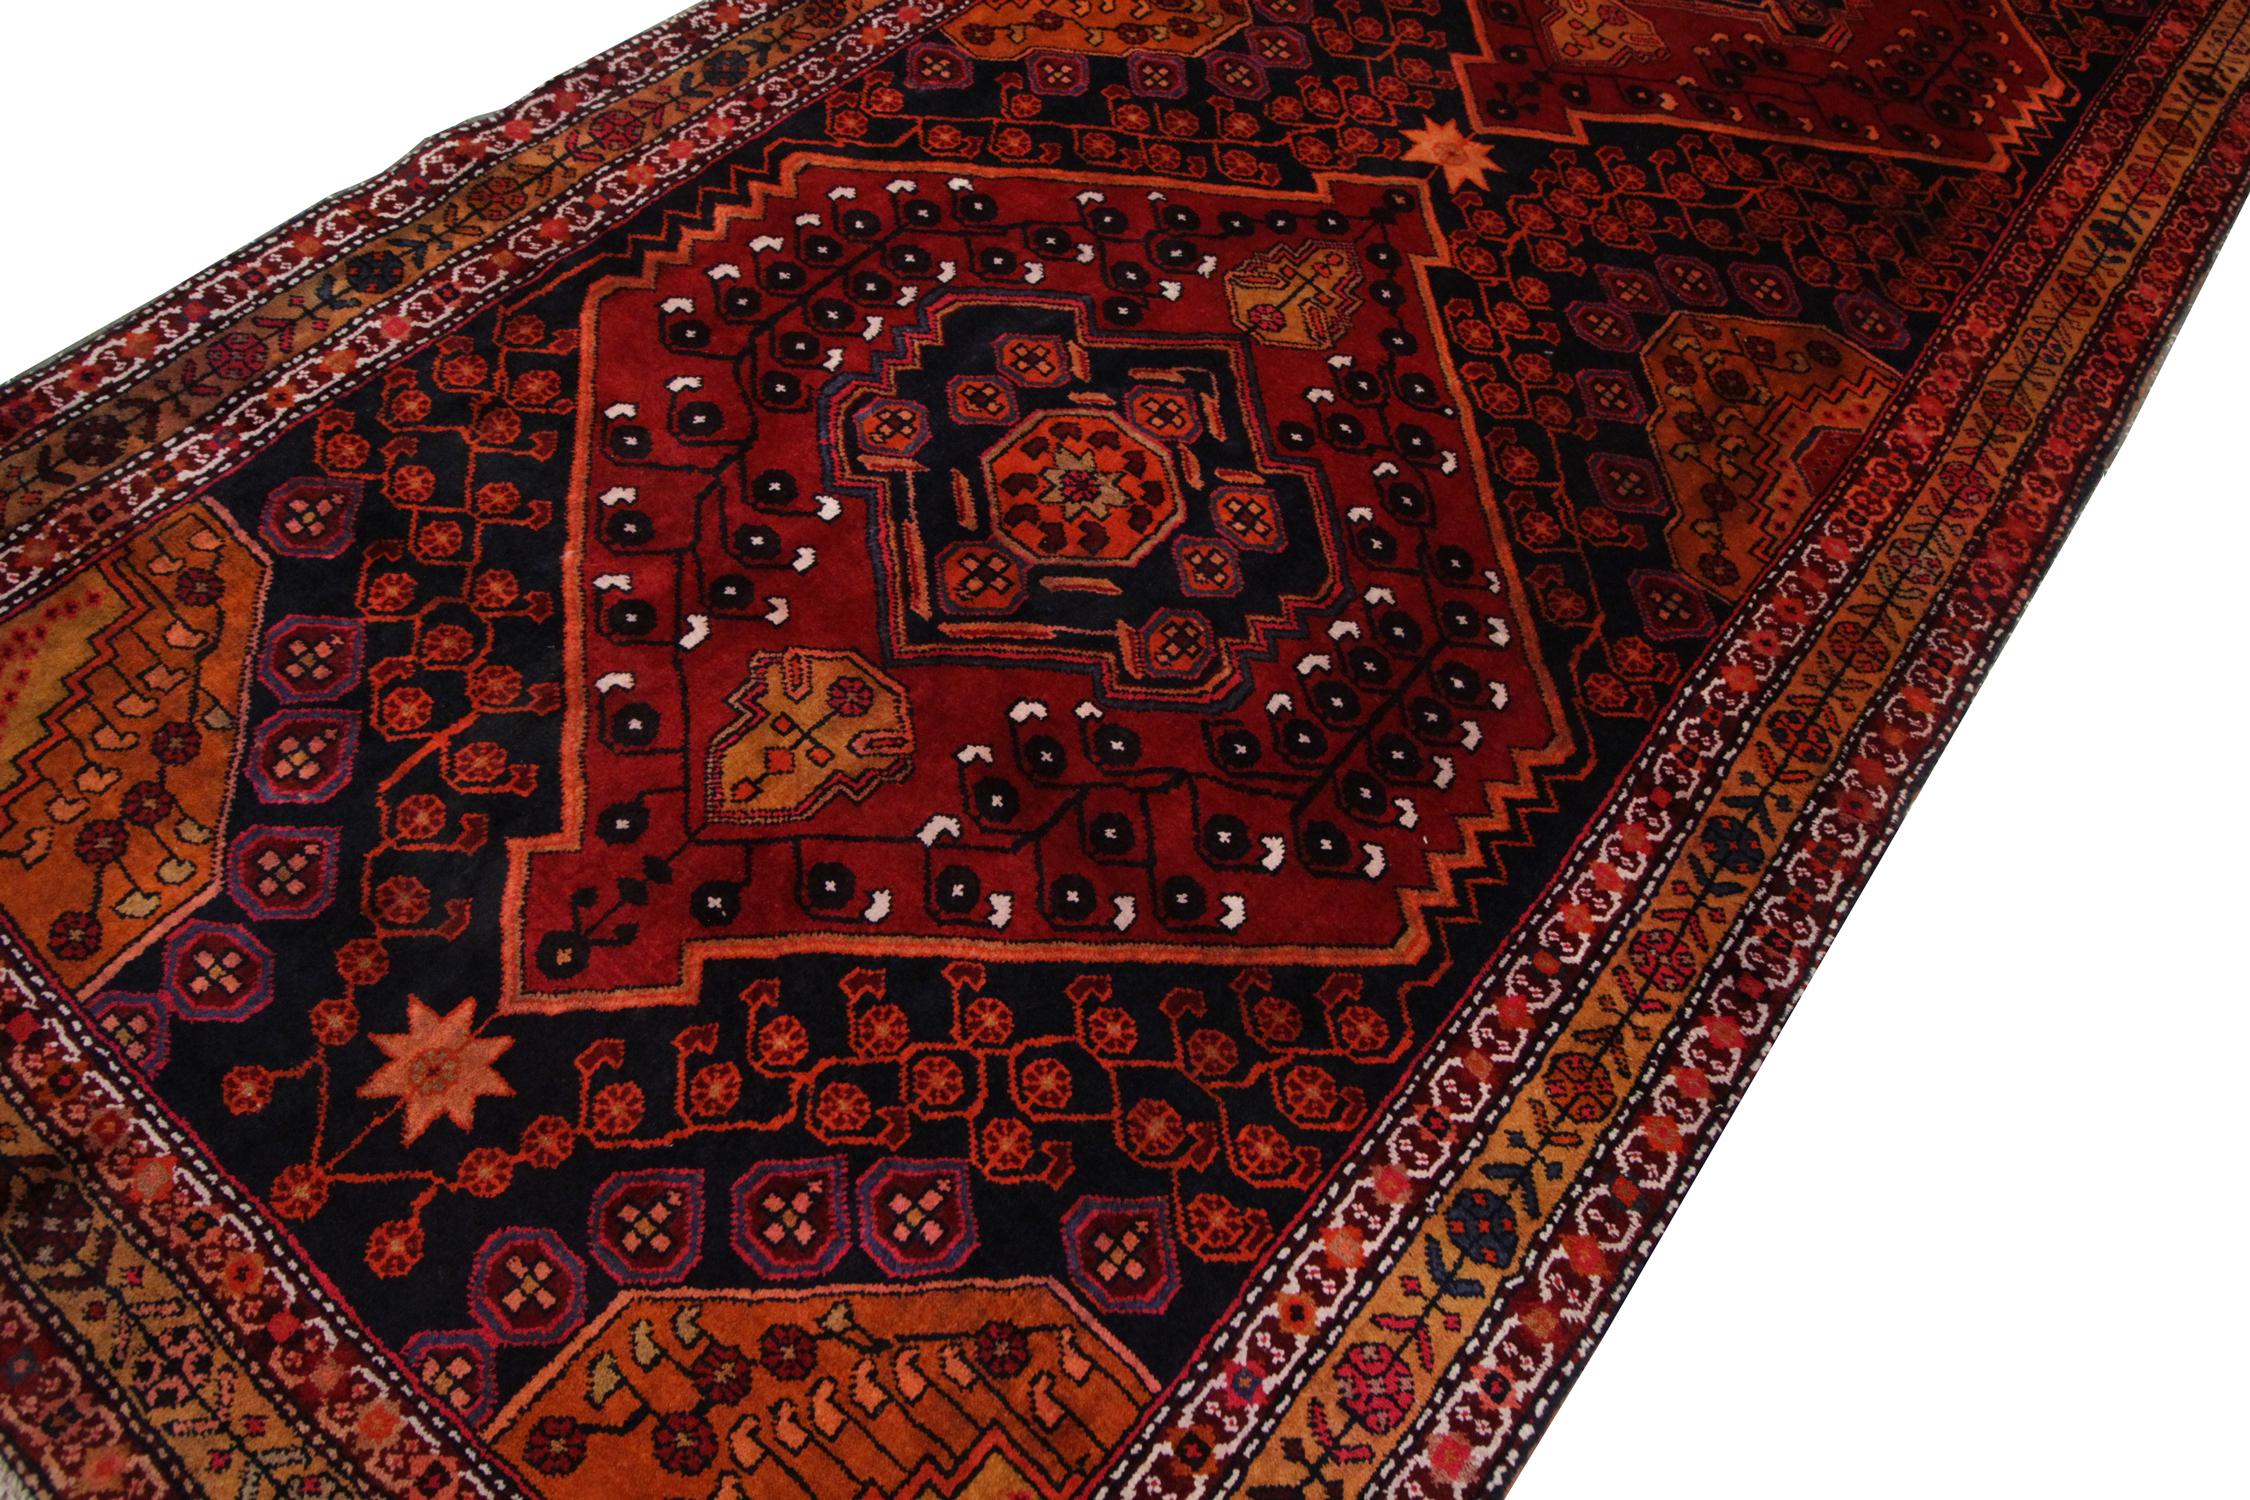 Antique rug handmade carpet with intricate design and deep oranges and reds, perfect for any modern or traditional home decor. This Oriental rug Caucasian runner rug has been handwoven and constructed with the finest hand-spun wool dyed with 100%